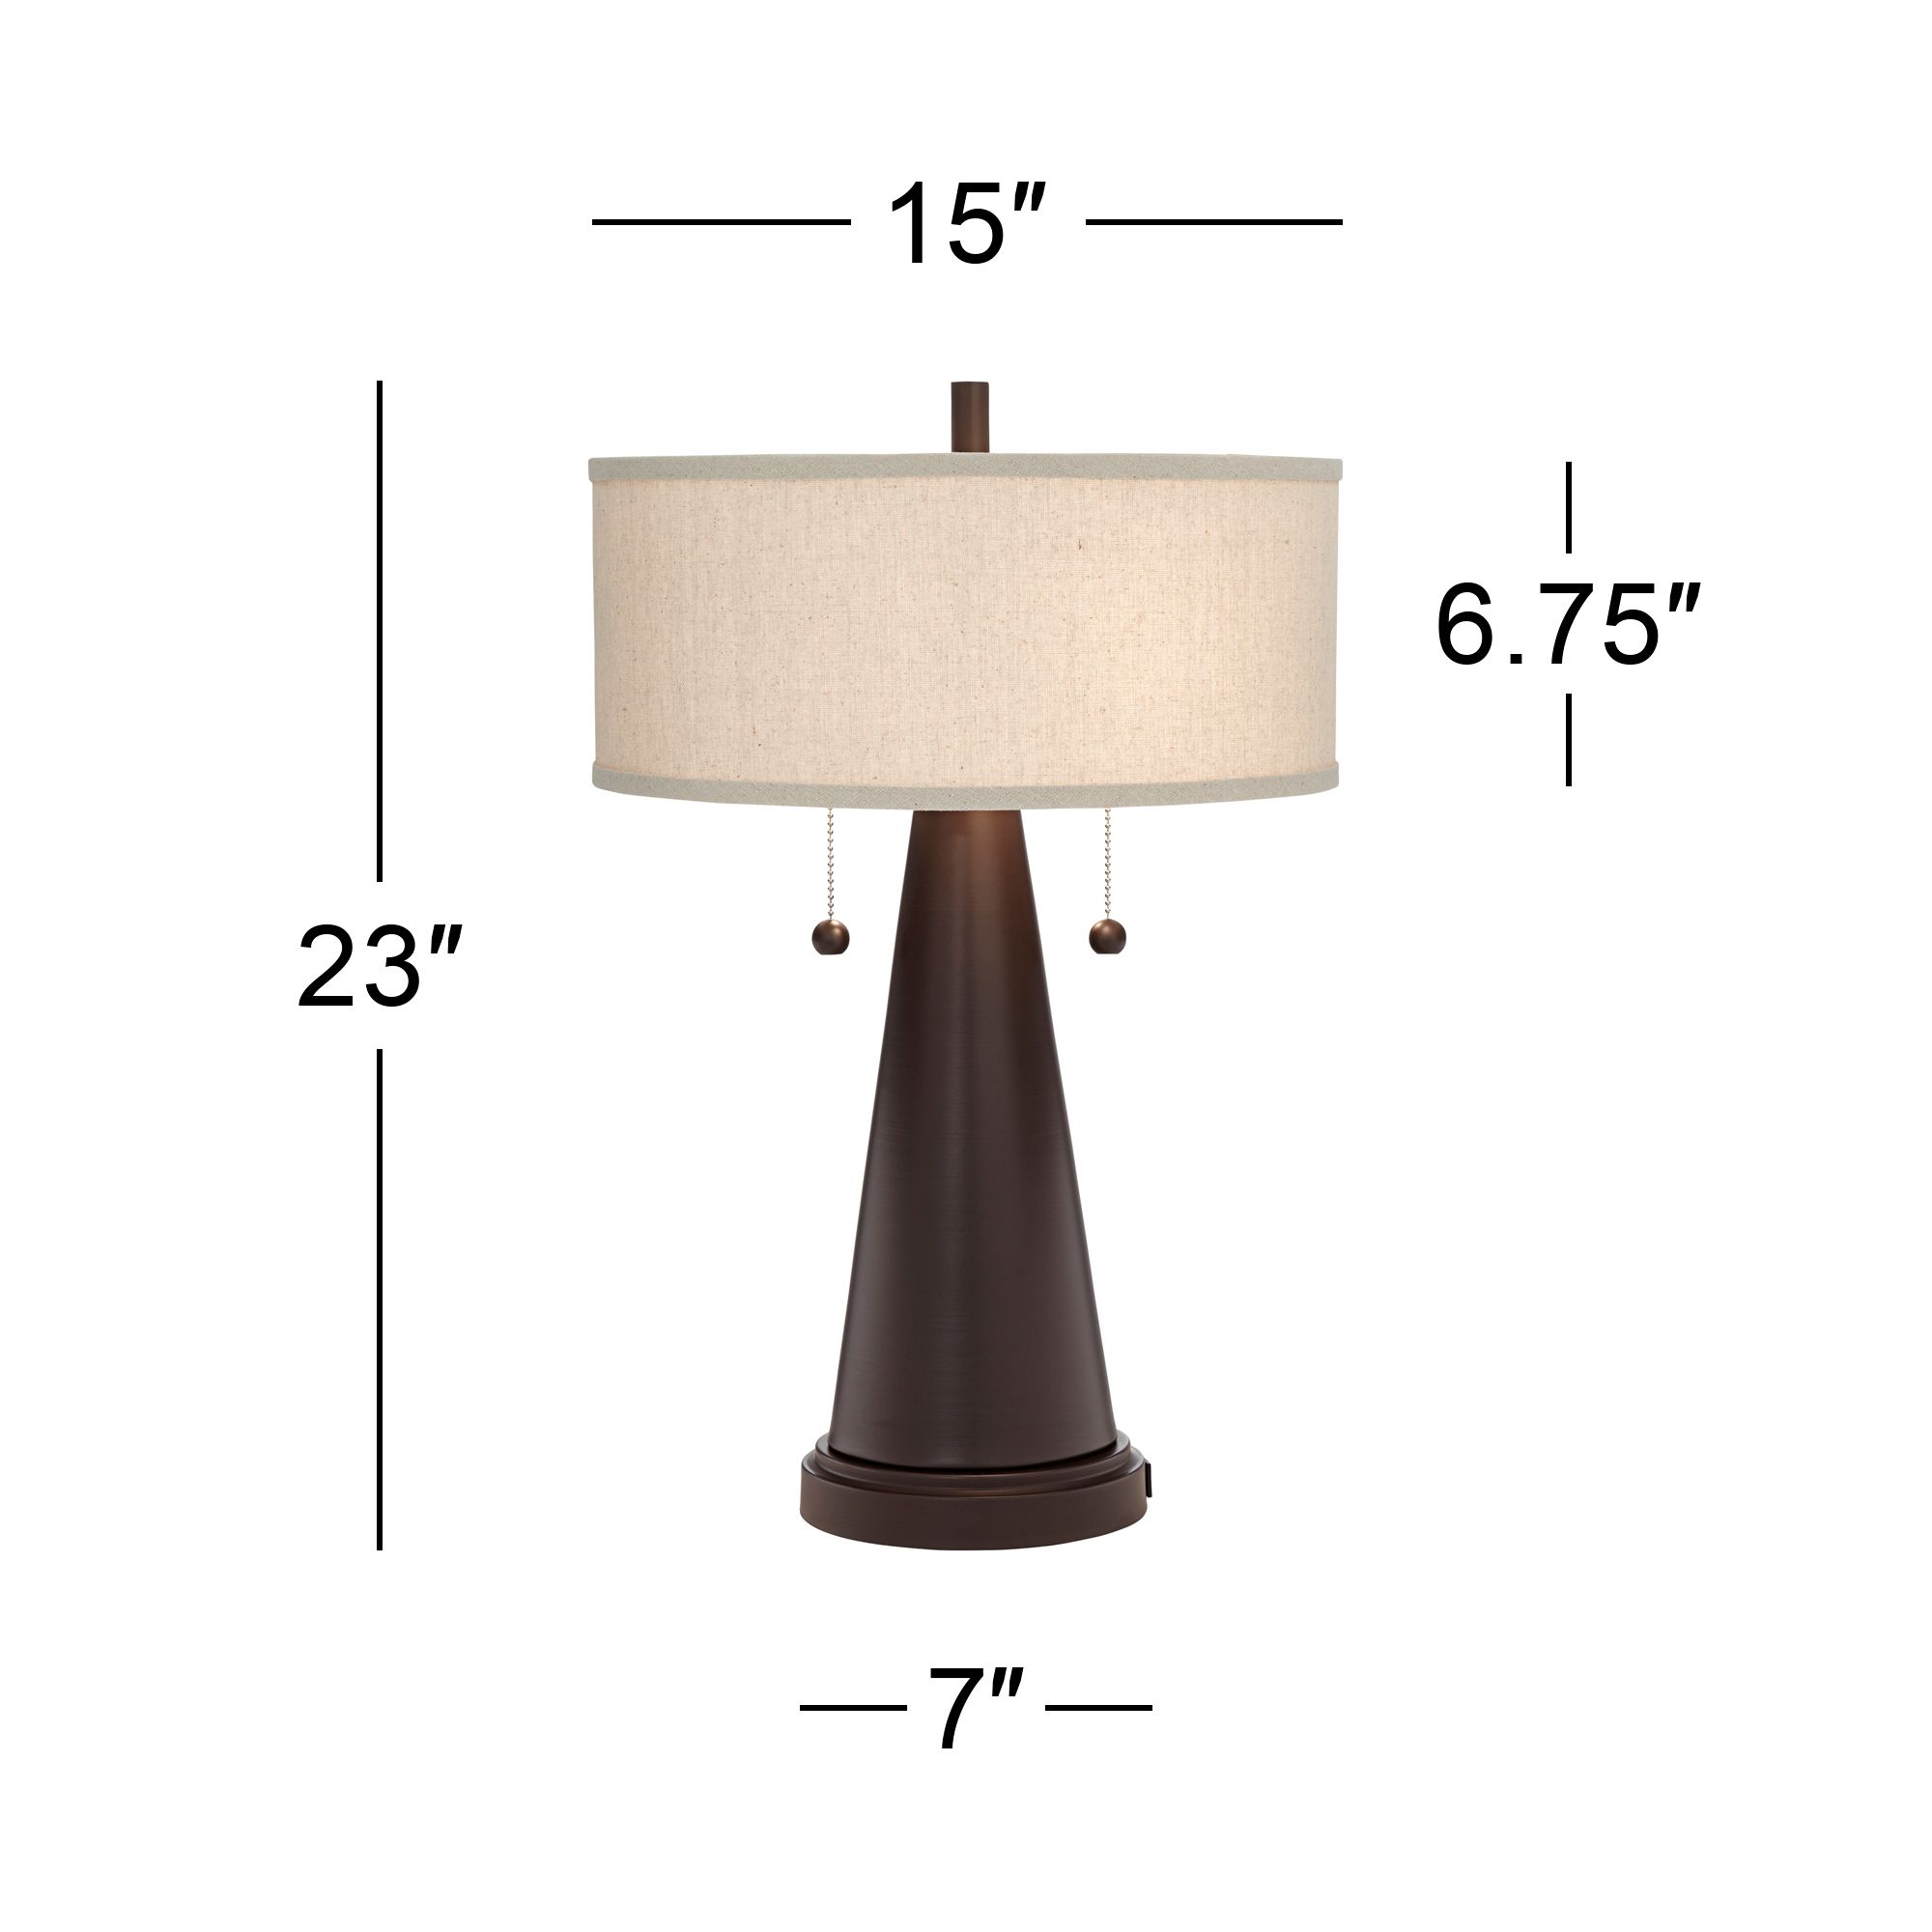 Franklin Iron Works Craig Rustic Farmhouse Accent Table Lamps 23" High Set of 2 Bronze with USB Charging Port Natural Drum Shade for Bedroom Desk - image 4 of 8